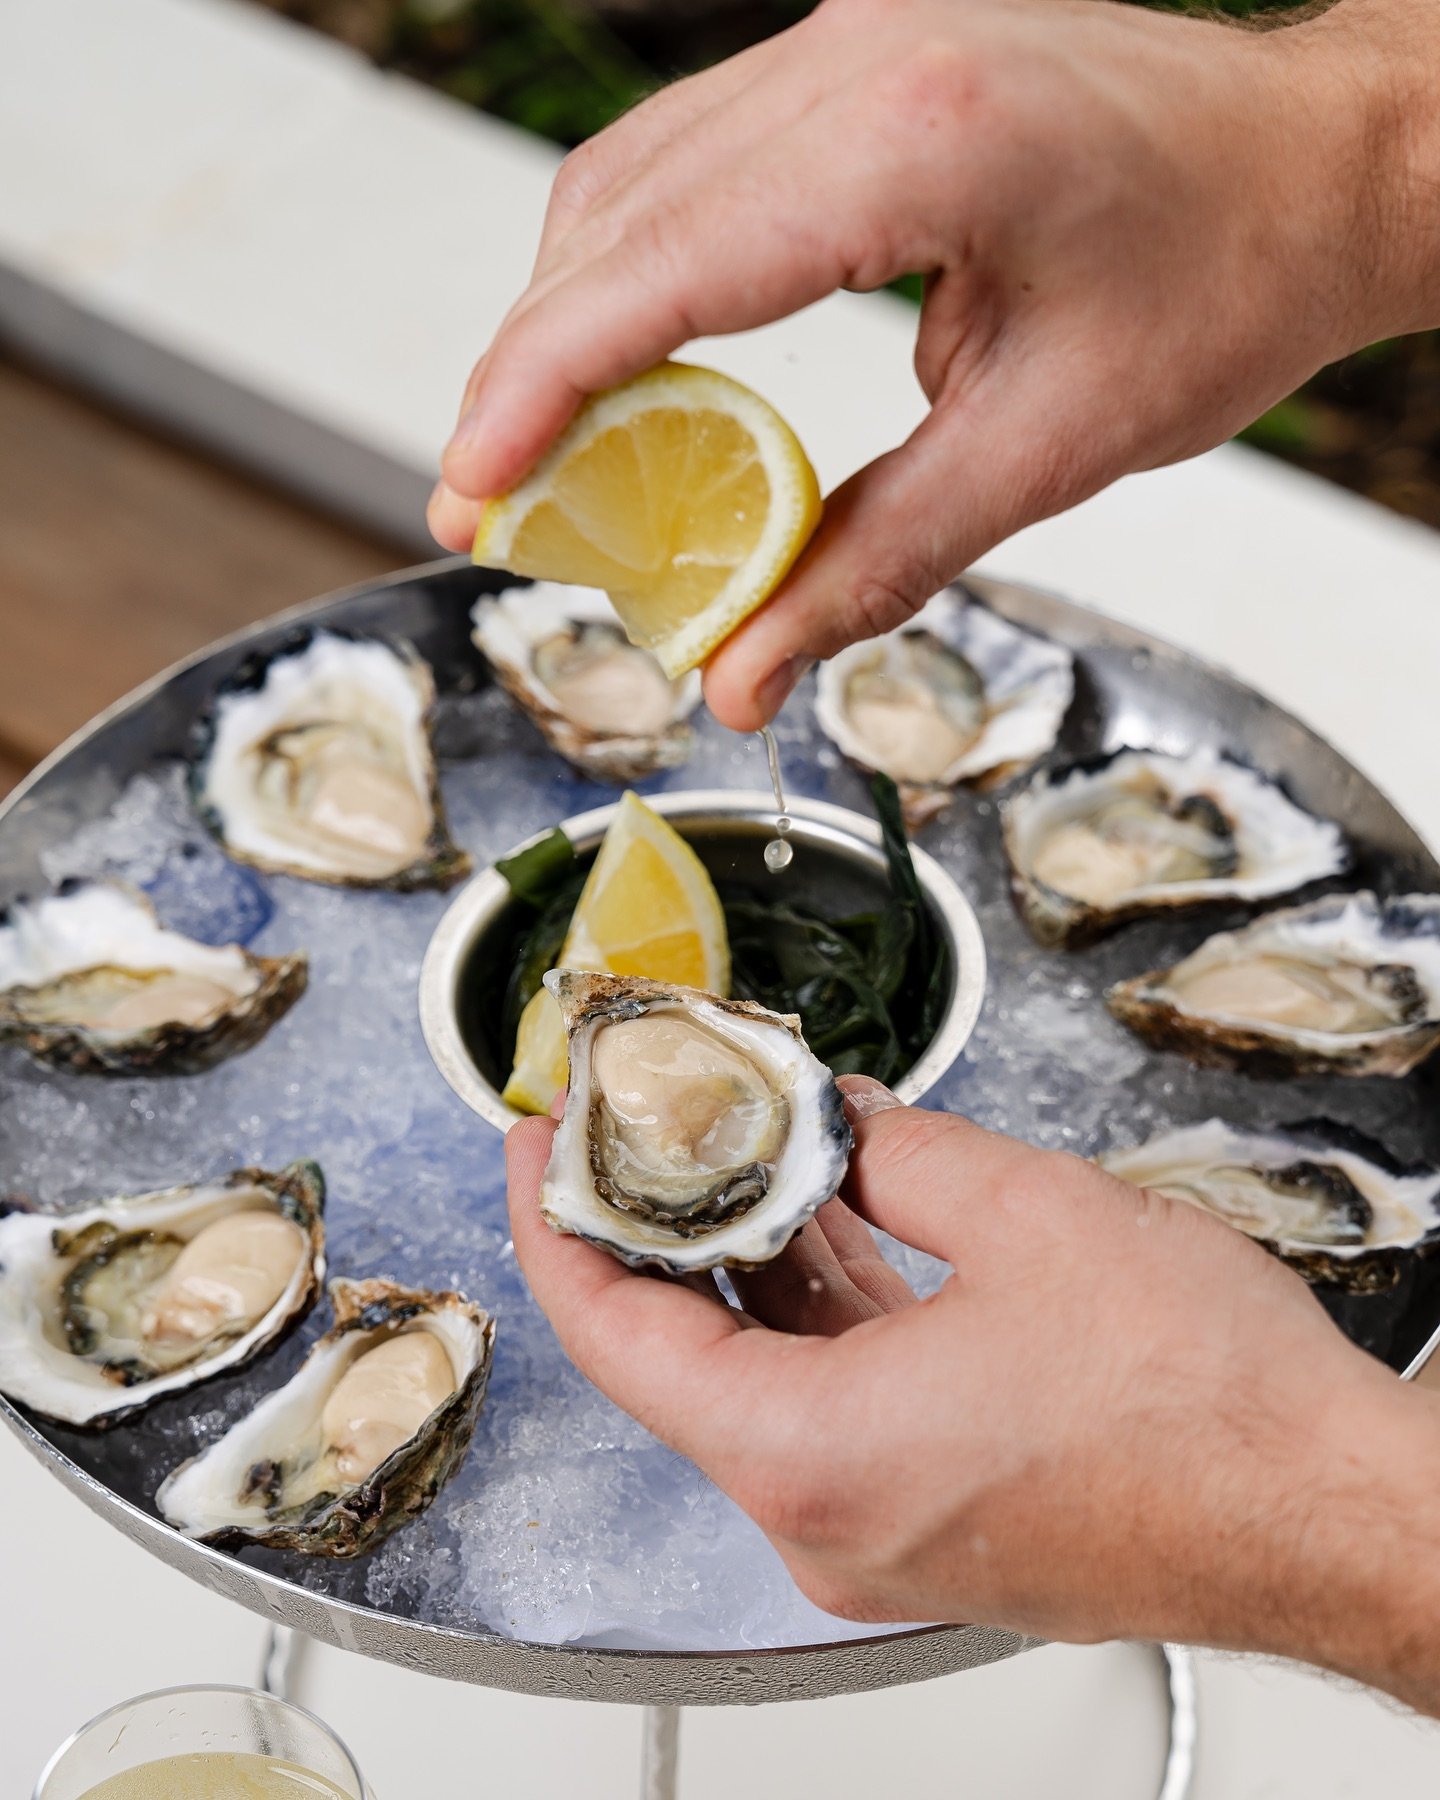 They don&rsquo;t get any fresher 🦪

Every Monday enjoy freshly shucked oysters next door at Fosh Tails for $3 each ~ part of our daily Catch of the Day deals available Monday to Thursday. 

www.foshportside.com.au/bookings for reservations or call u